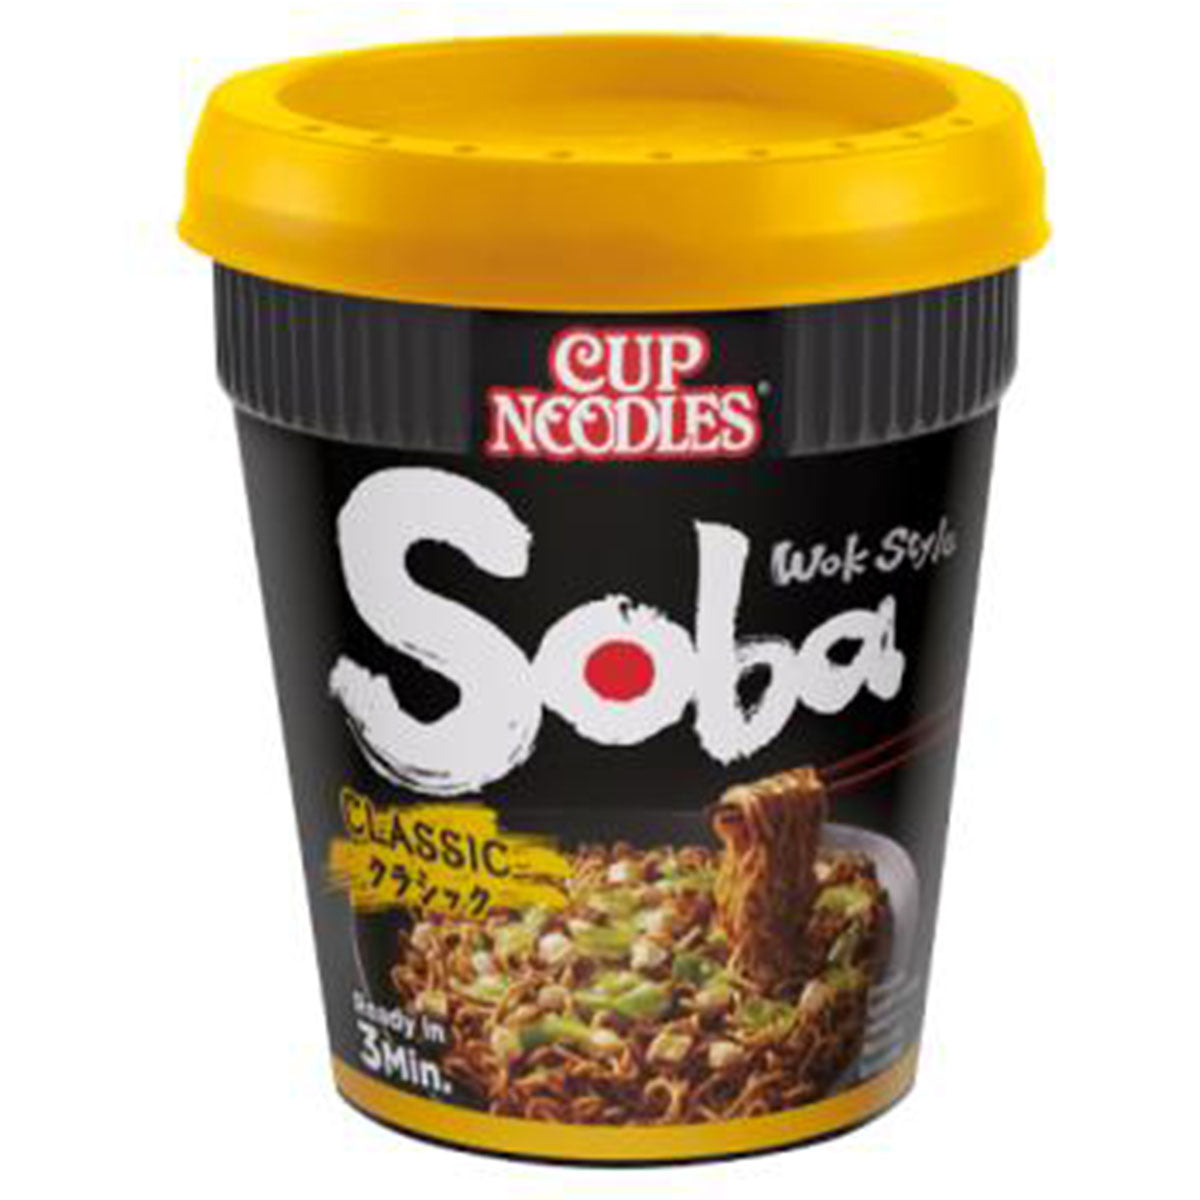 Nissin - Cup Noodles Soba Wok Style Classic - 90g - Continental Food Store